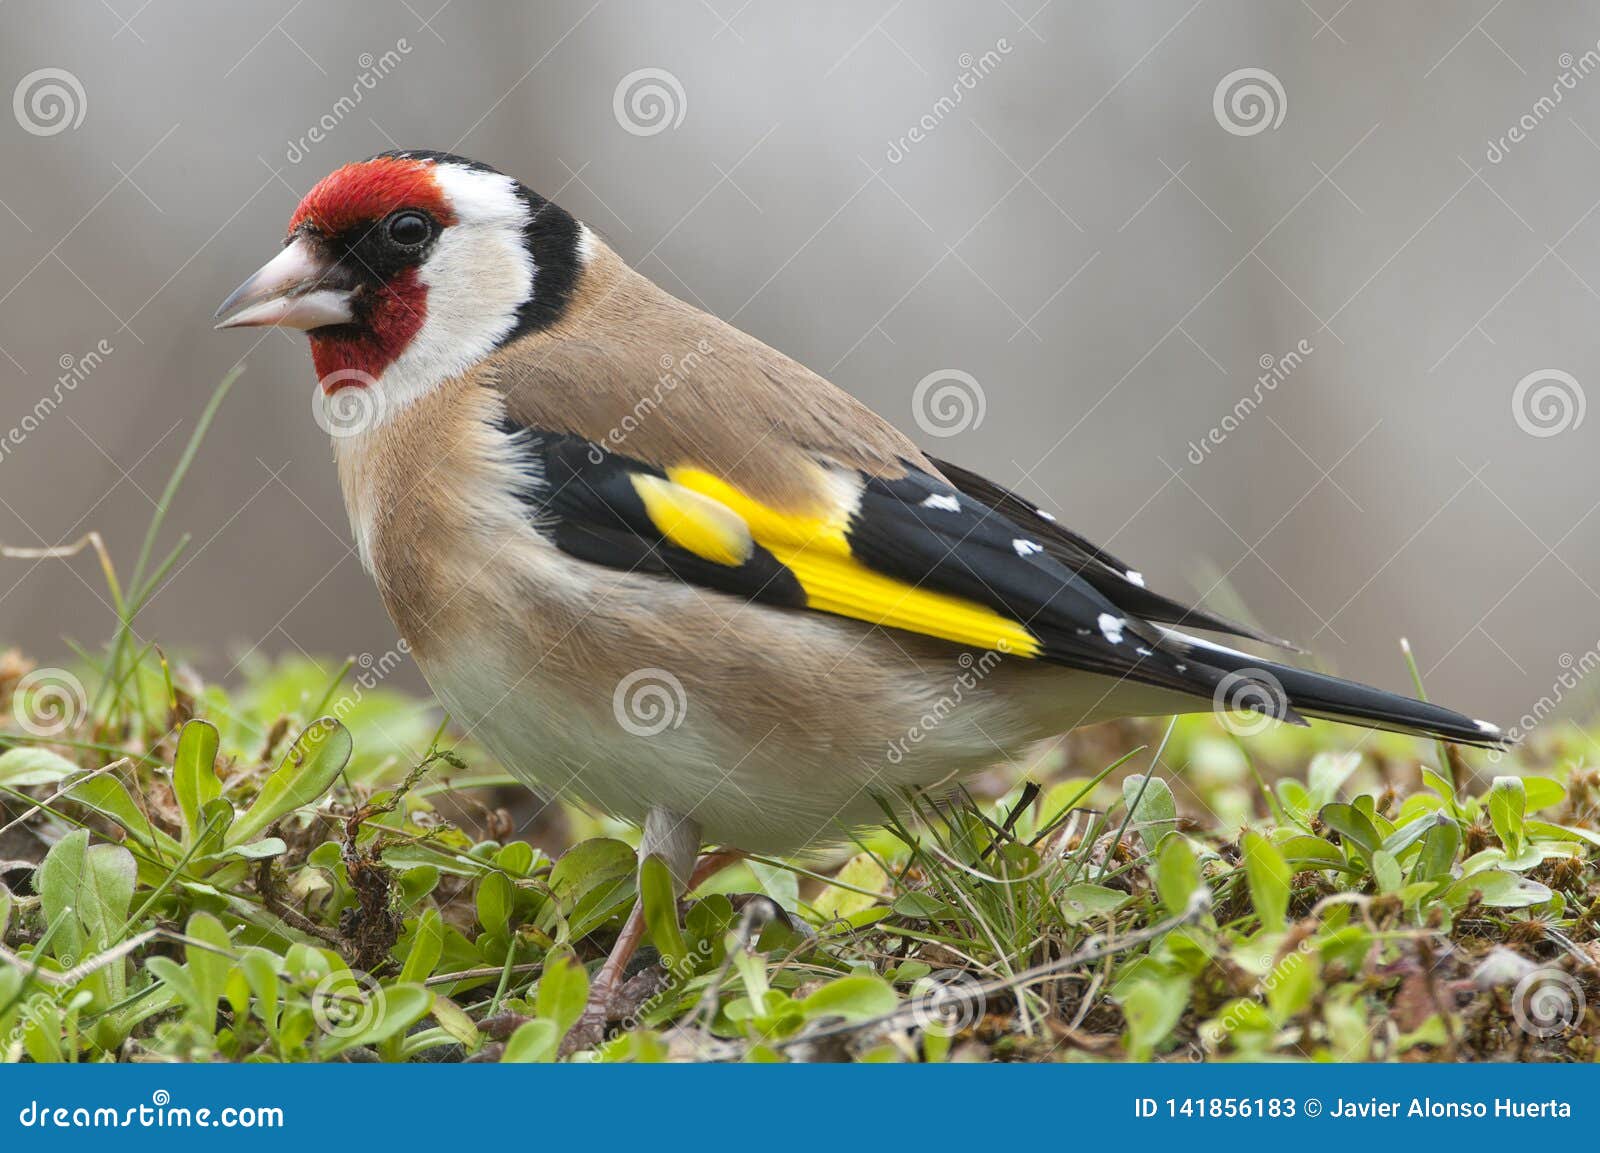 goldfinch - carduelis carduelis, portrait looking for food, plumage and colors